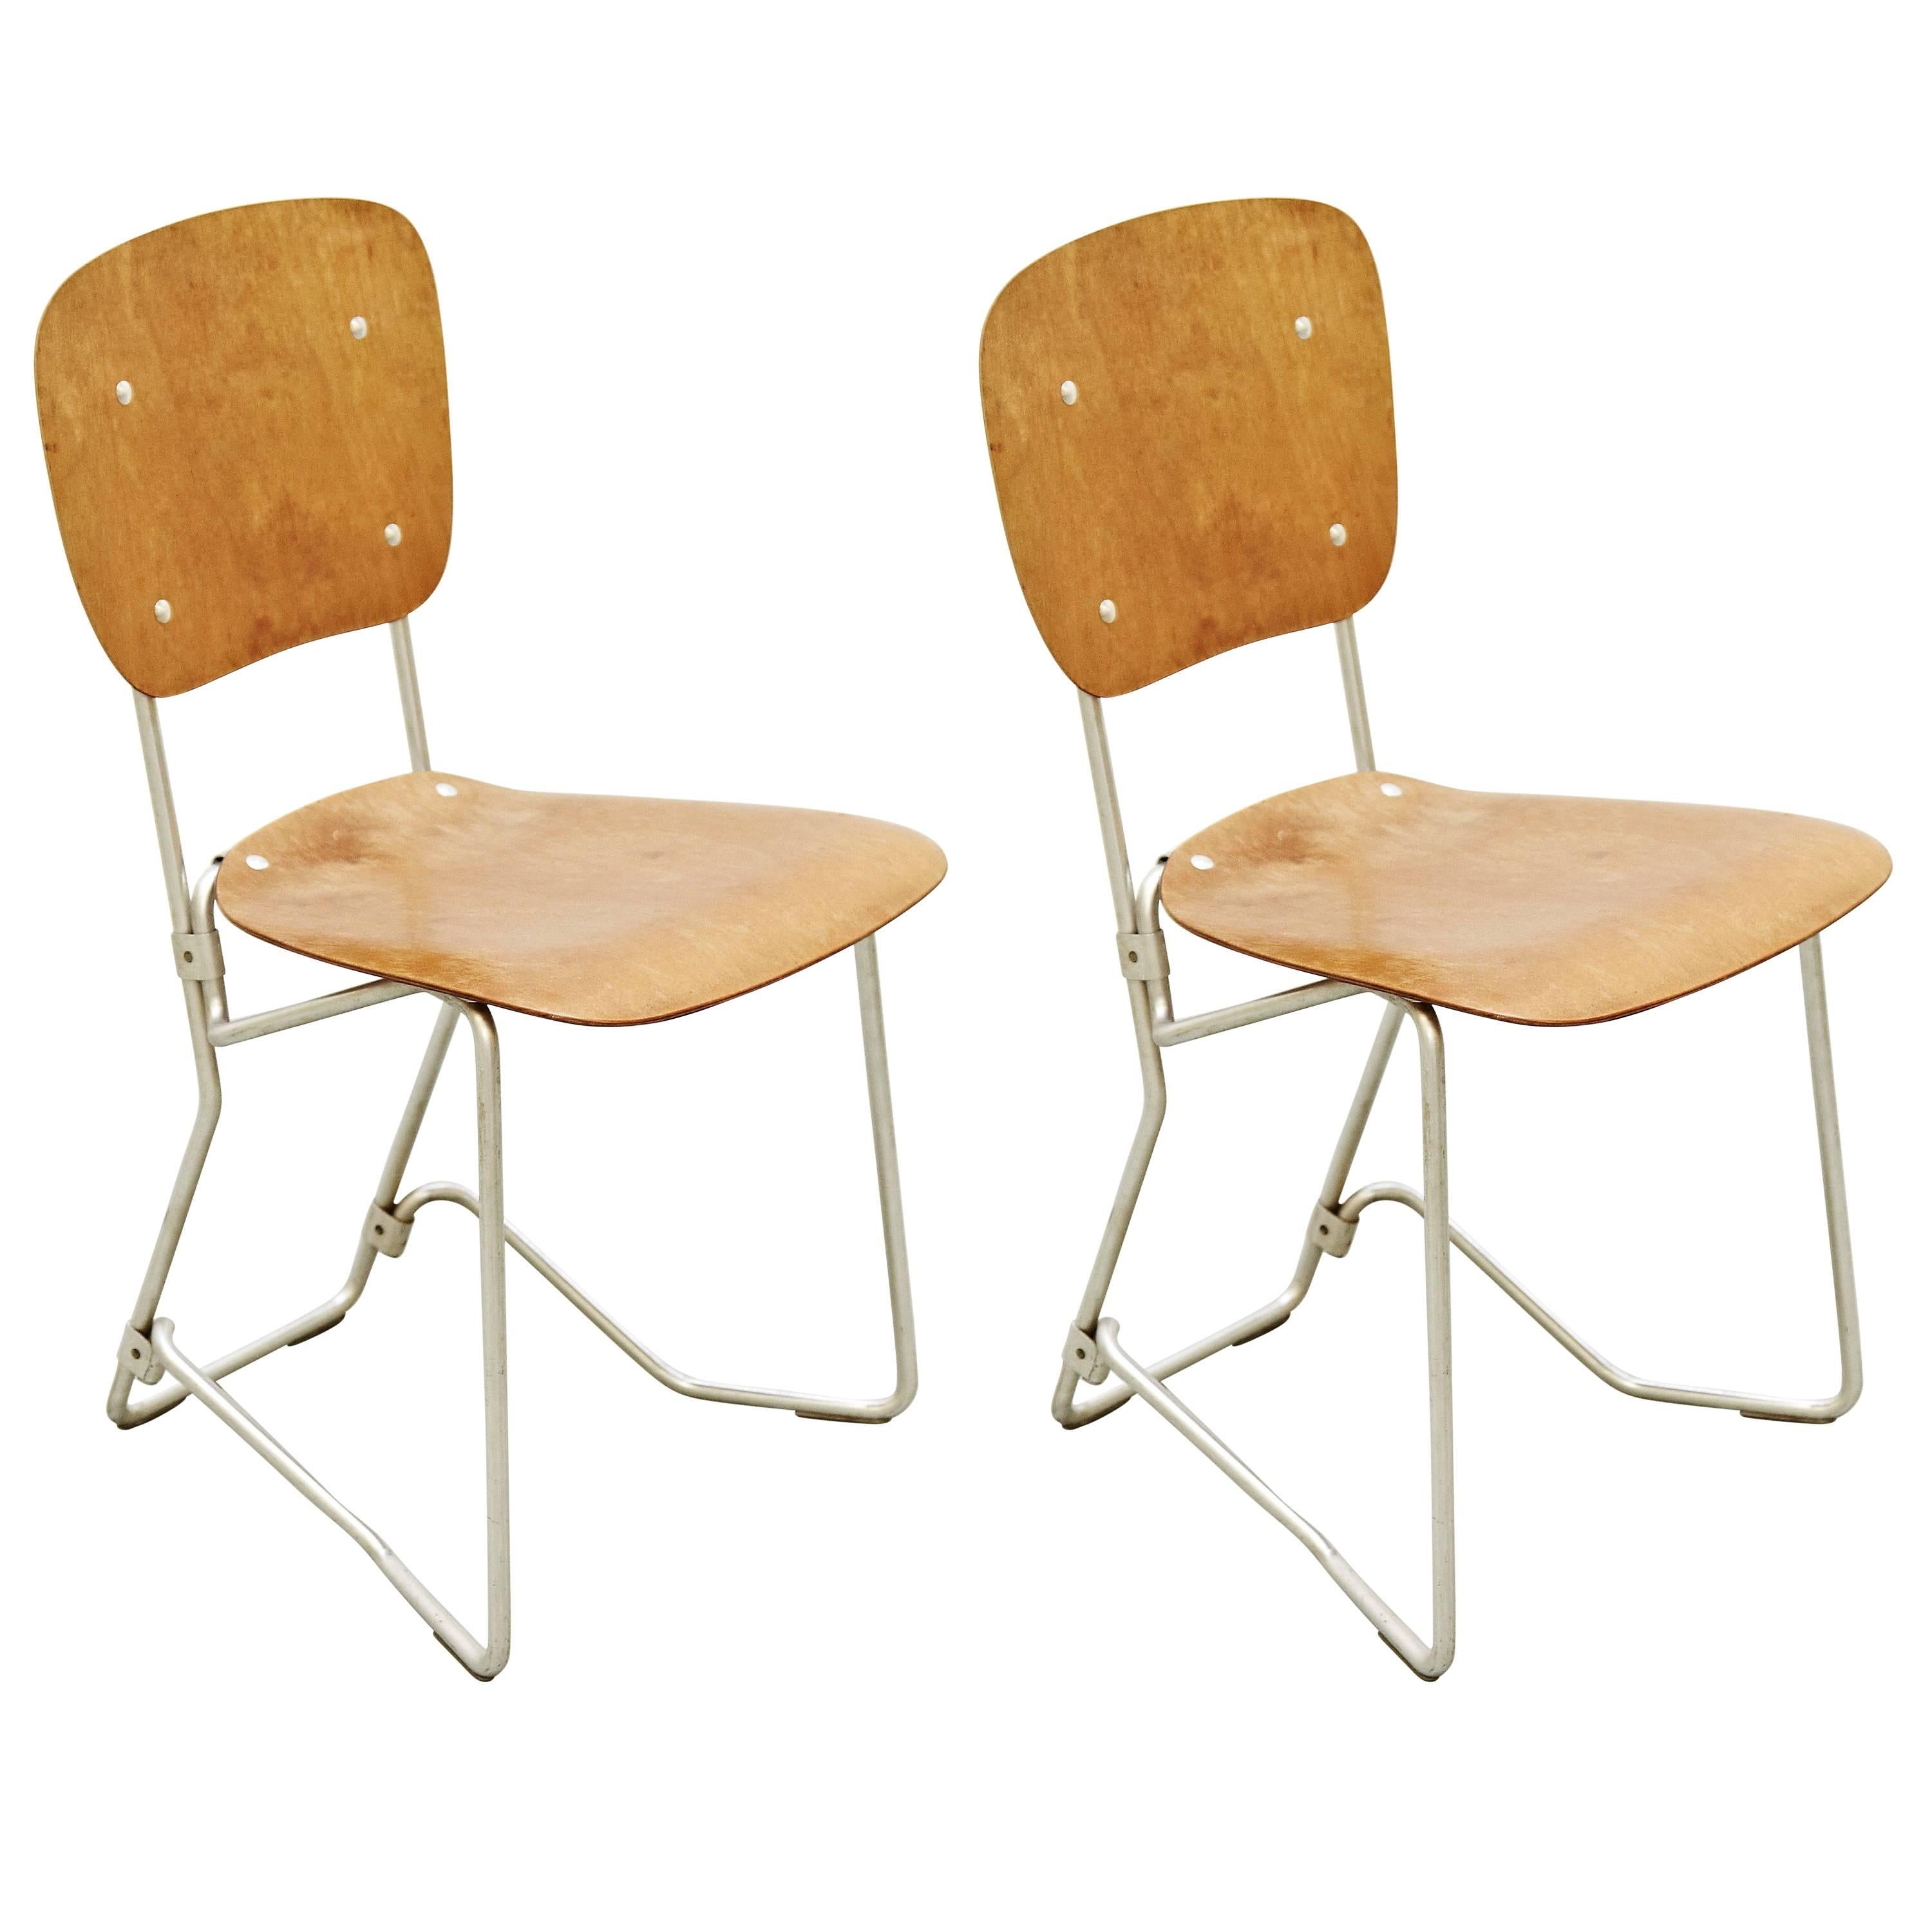 Aluflex First Edition Pair of Chairs by Armin Wirth 1